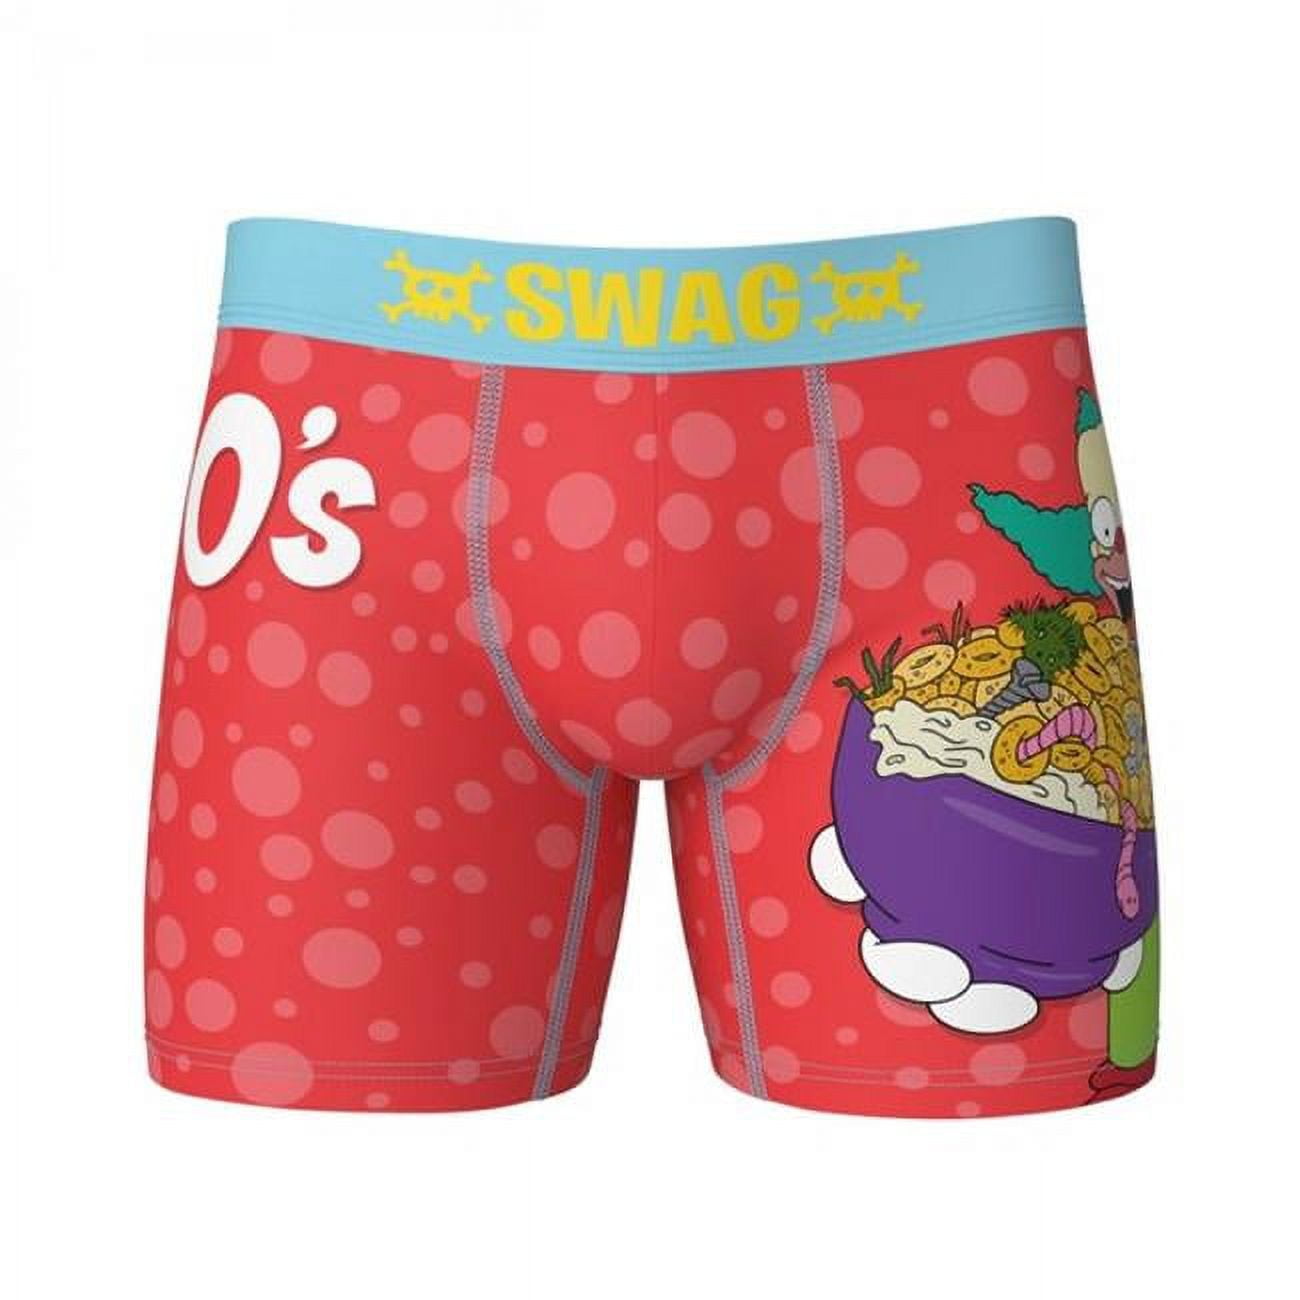 Simpsons 847051-ge-40-42 The Simpsons Krusty-OS Cereal Swag Boxer Briefs -  Extra Large 40-42 